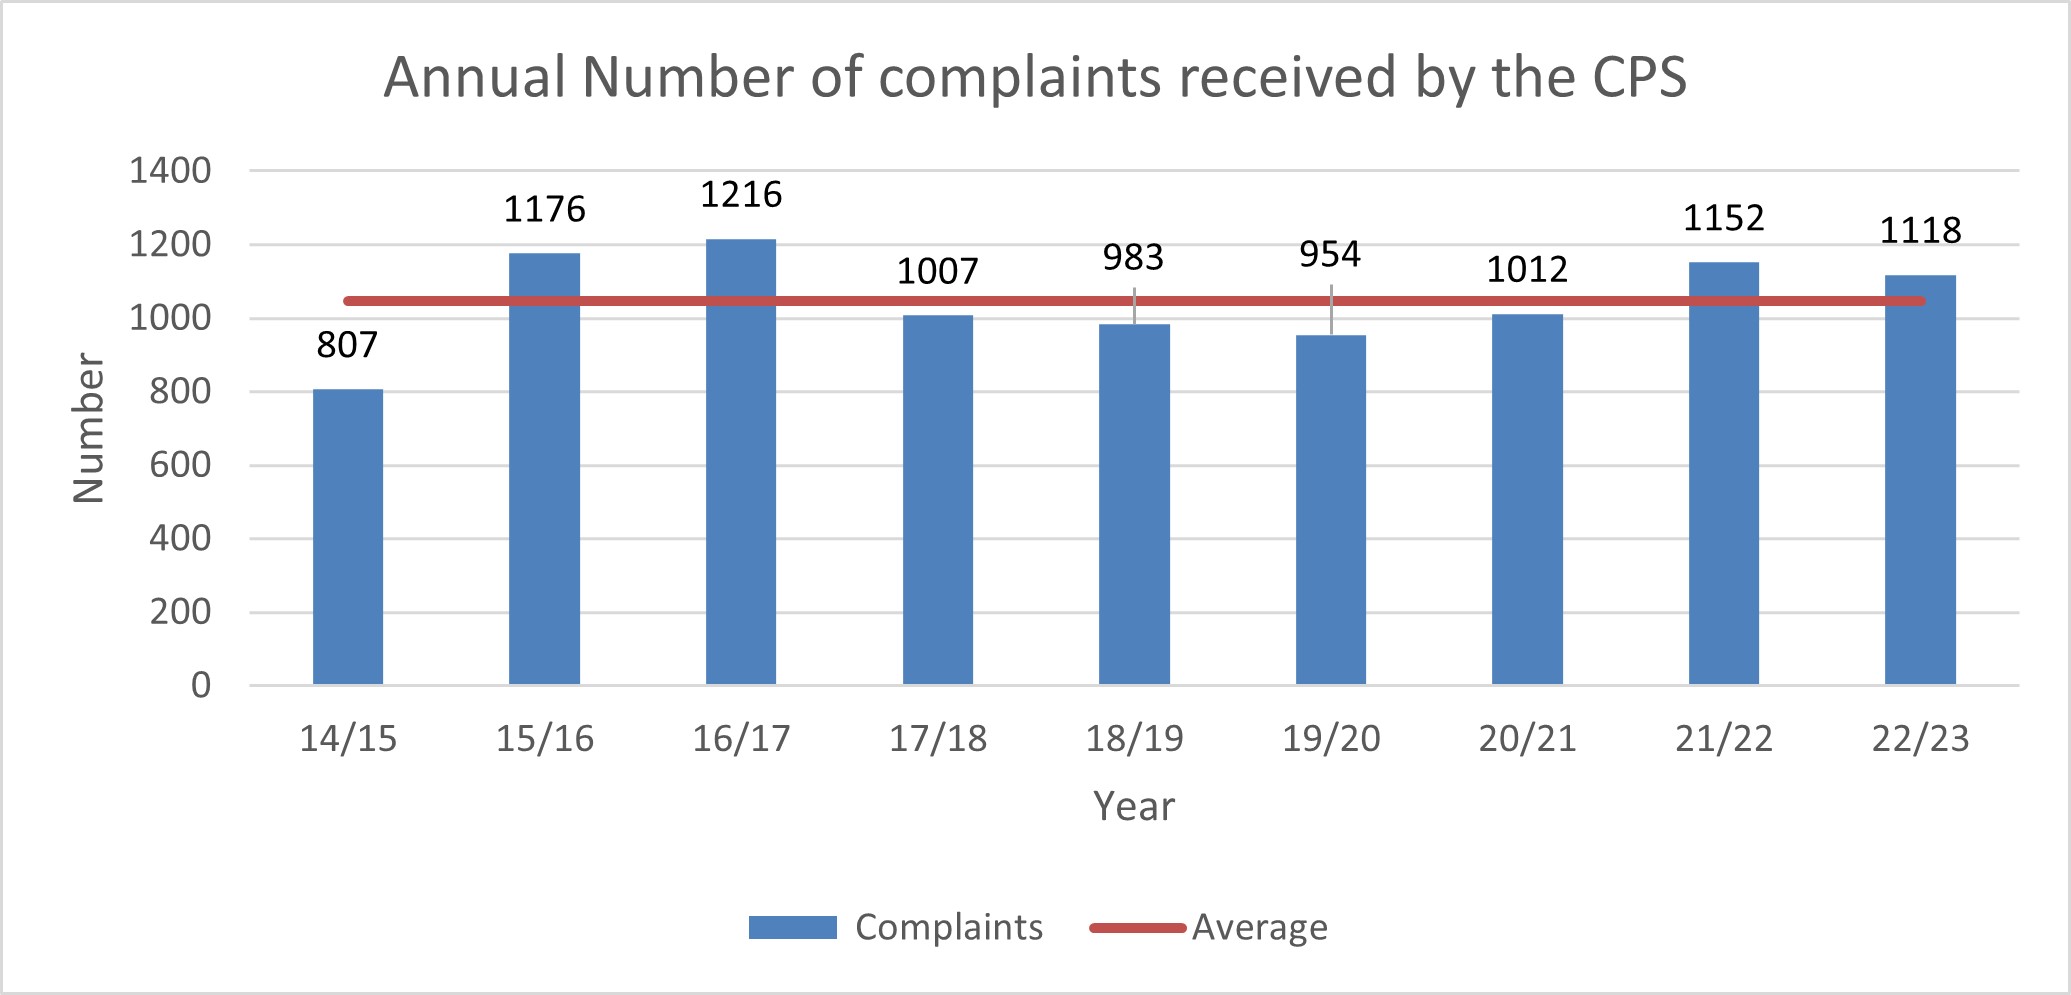 Graph showing the annual number of complaints received by the CPS from 2014/15 to 2022/23. These were as follows: 2014/15: 807, 2015/16: 1176, 2016/17: 1216, 2017/18: 1007, 2018/19: 983, 2019/20: 954, 2020/21: 1012, 2021/22: 1152, 2022/23: 1118. The average annual number of complaints received by the CPS over this period was 1047.2.